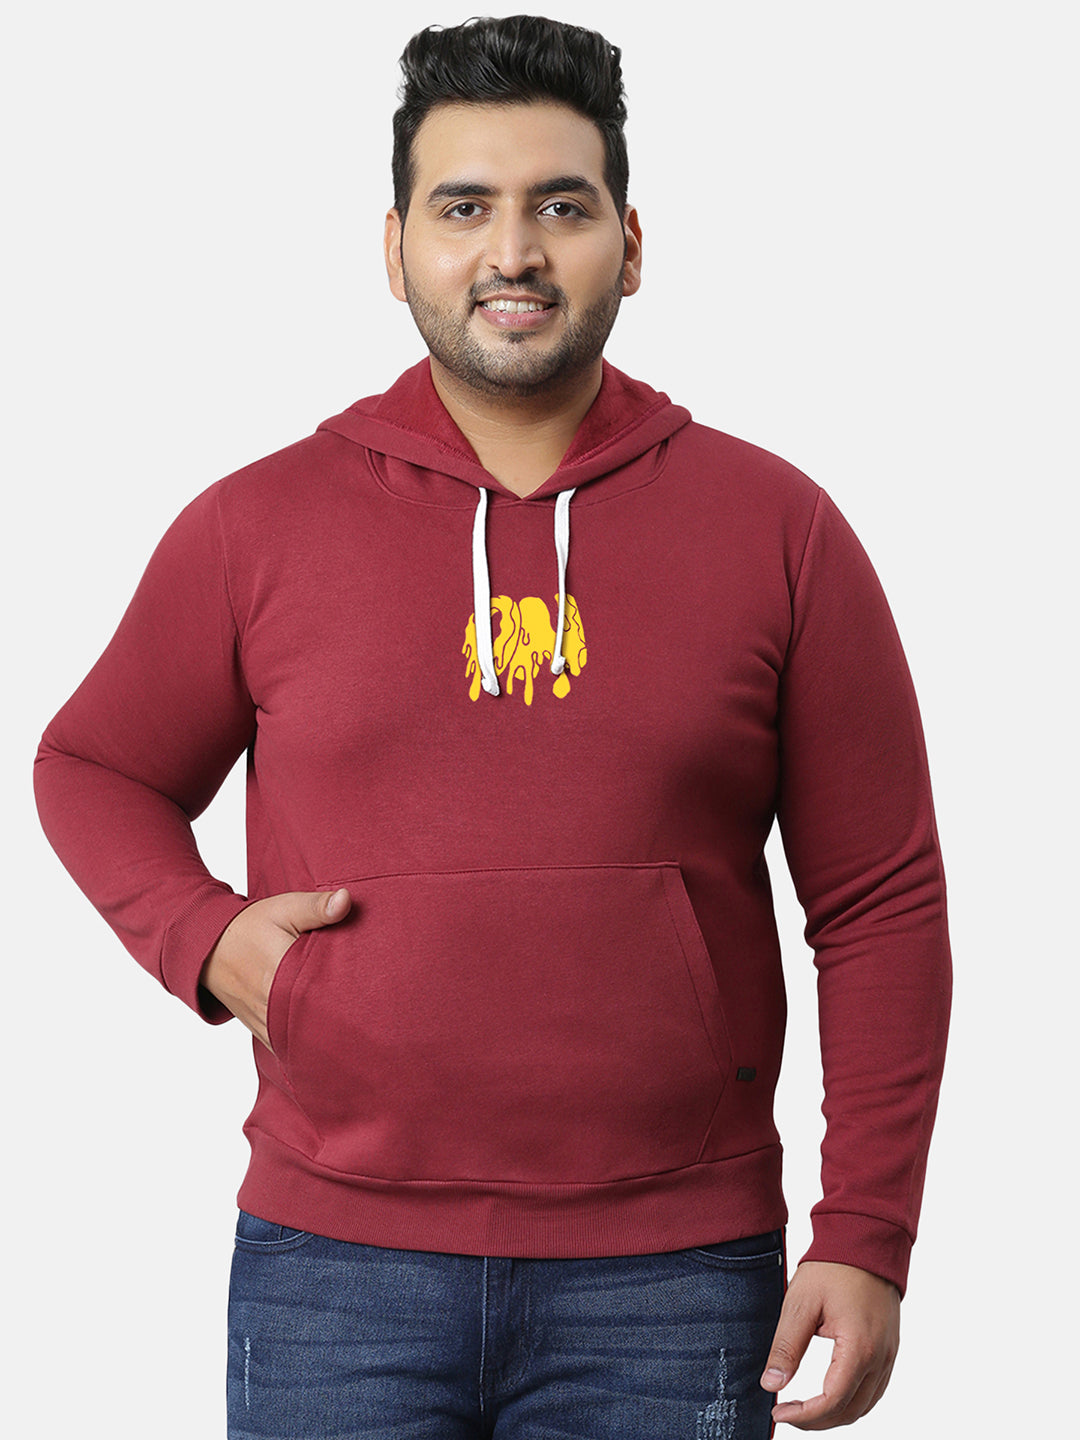 Wine Red Dripping On Hoodie